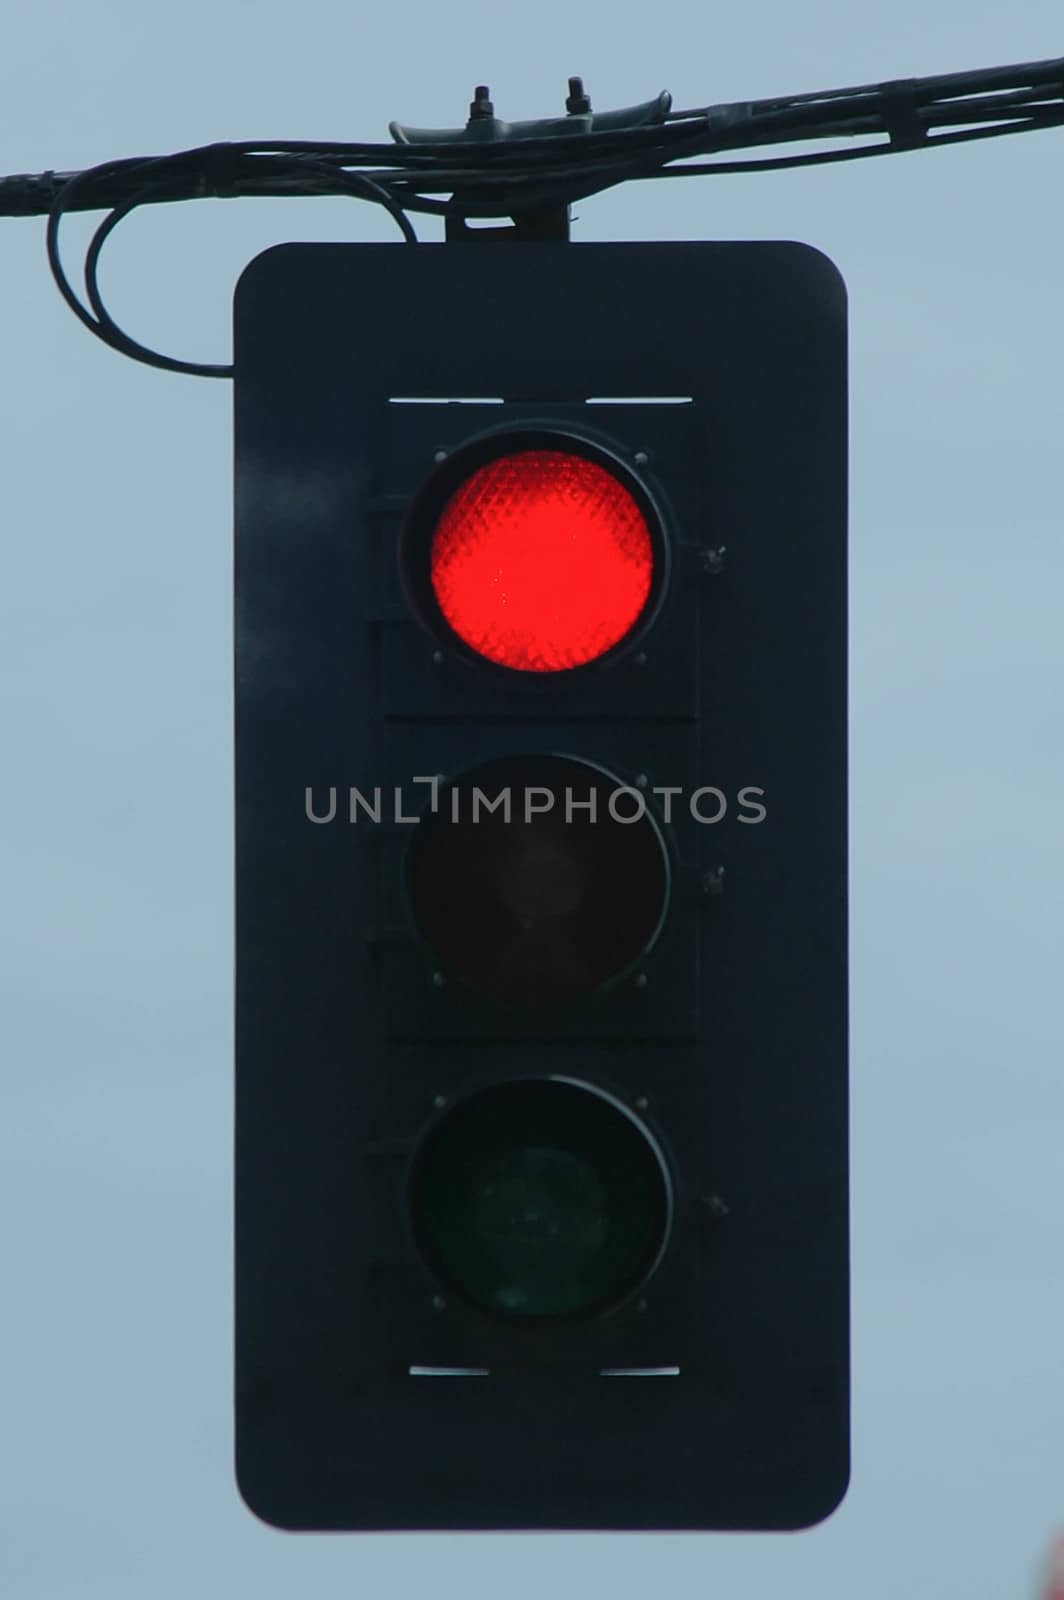 Traffic Light directing motorists and pedestrians to stop